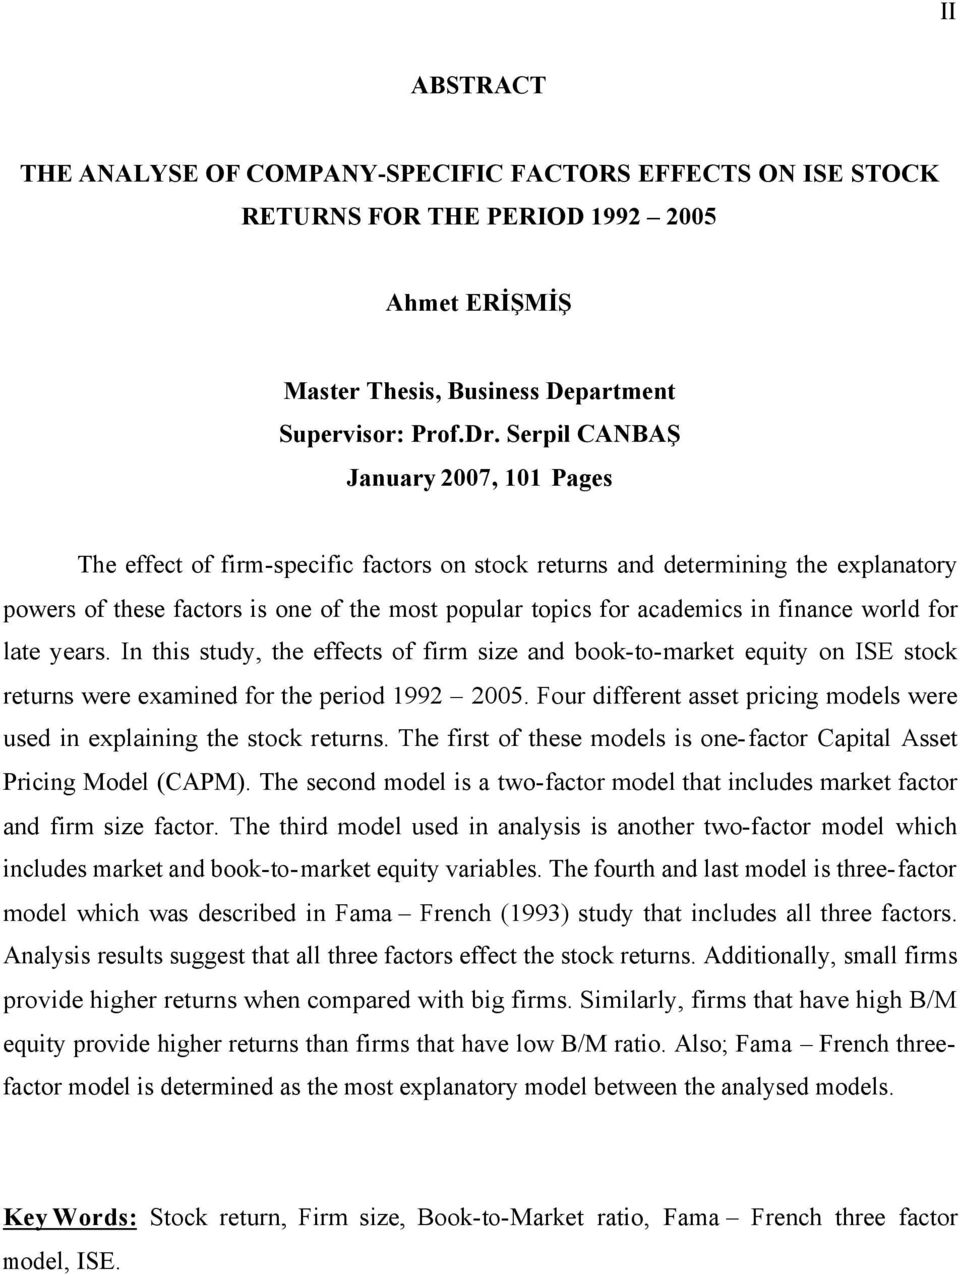 finance world for late years. In this study, the effects of firm size and book-to-market equity on ISE stock returns were examined for the period 1992 2005.